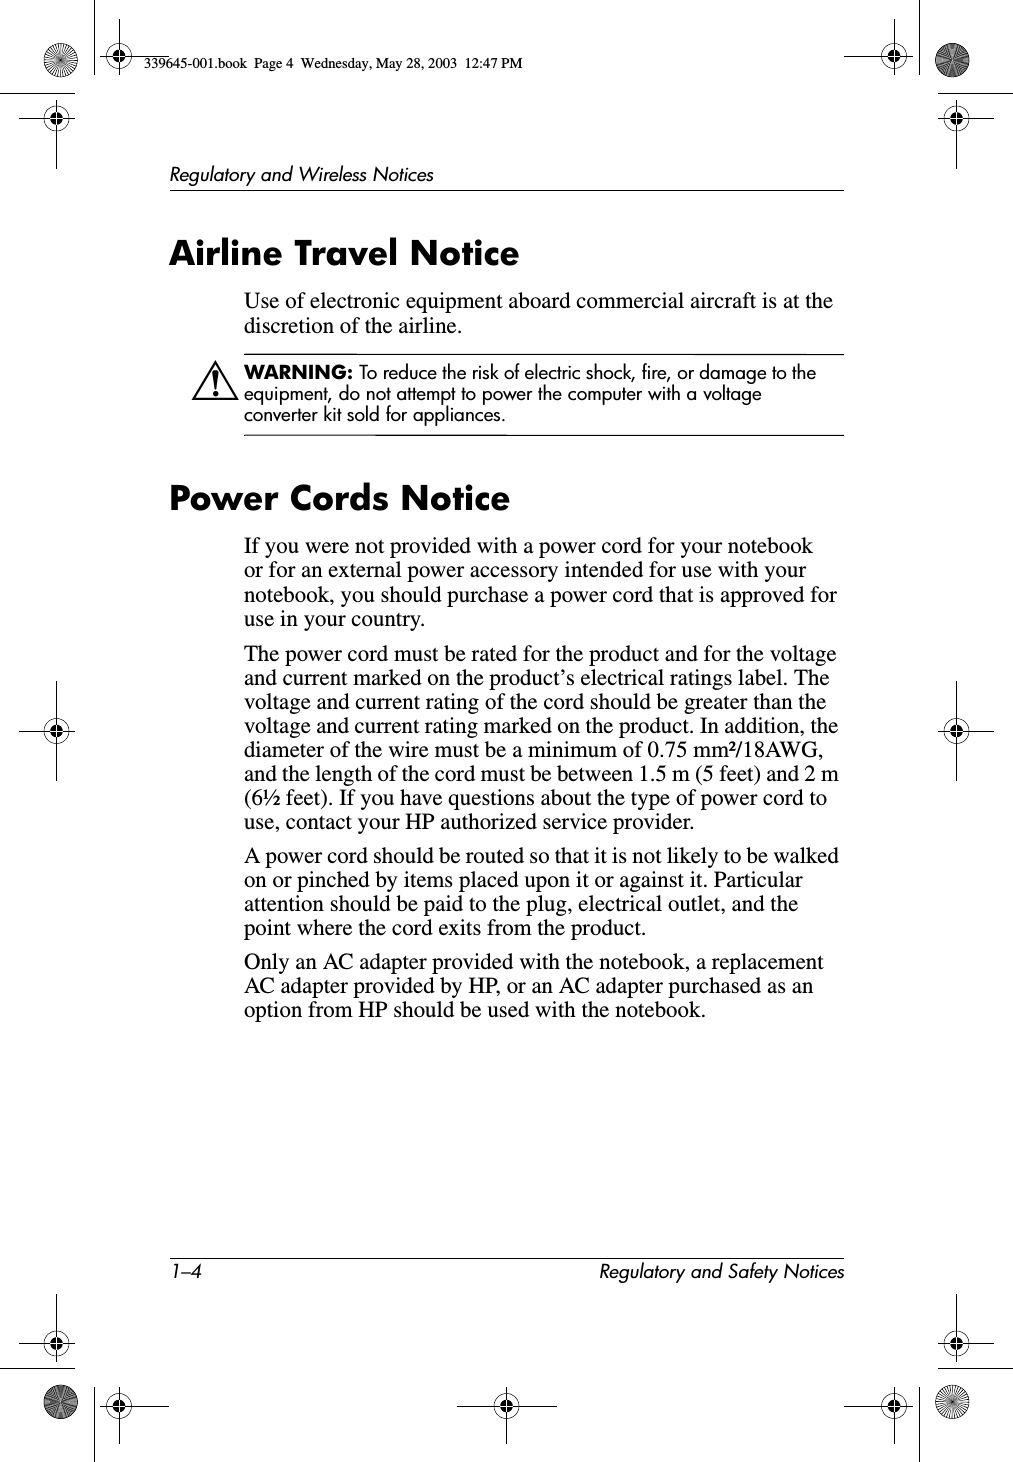 1–4 Regulatory and Safety NoticesRegulatory and Wireless NoticesAirline Travel NoticeUse of electronic equipment aboard commercial aircraft is at the discretion of the airline.ÅWARNING: To reduce the risk of electric shock, fire, or damage to the equipment, do not attempt to power the computer with a voltage converter kit sold for appliances.Power Cords NoticeIf you were not provided with a power cord for your notebook or for an external power accessory intended for use with your notebook, you should purchase a power cord that is approved for use in your country.The power cord must be rated for the product and for the voltage and current marked on the product’s electrical ratings label. The voltage and current rating of the cord should be greater than the voltage and current rating marked on the product. In addition, the diameter of the wire must be a minimum of 0.75 mm²/18AWG, and the length of the cord must be between 1.5 m (5 feet) and 2 m (6½ feet). If you have questions about the type of power cord to use, contact your HP authorized service provider.A power cord should be routed so that it is not likely to be walked on or pinched by items placed upon it or against it. Particular attention should be paid to the plug, electrical outlet, and the point where the cord exits from the product.Only an AC adapter provided with the notebook, a replacement AC adapter provided by HP, or an AC adapter purchased as an option from HP should be used with the notebook.339645-001.book  Page 4  Wednesday, May 28, 2003  12:47 PM